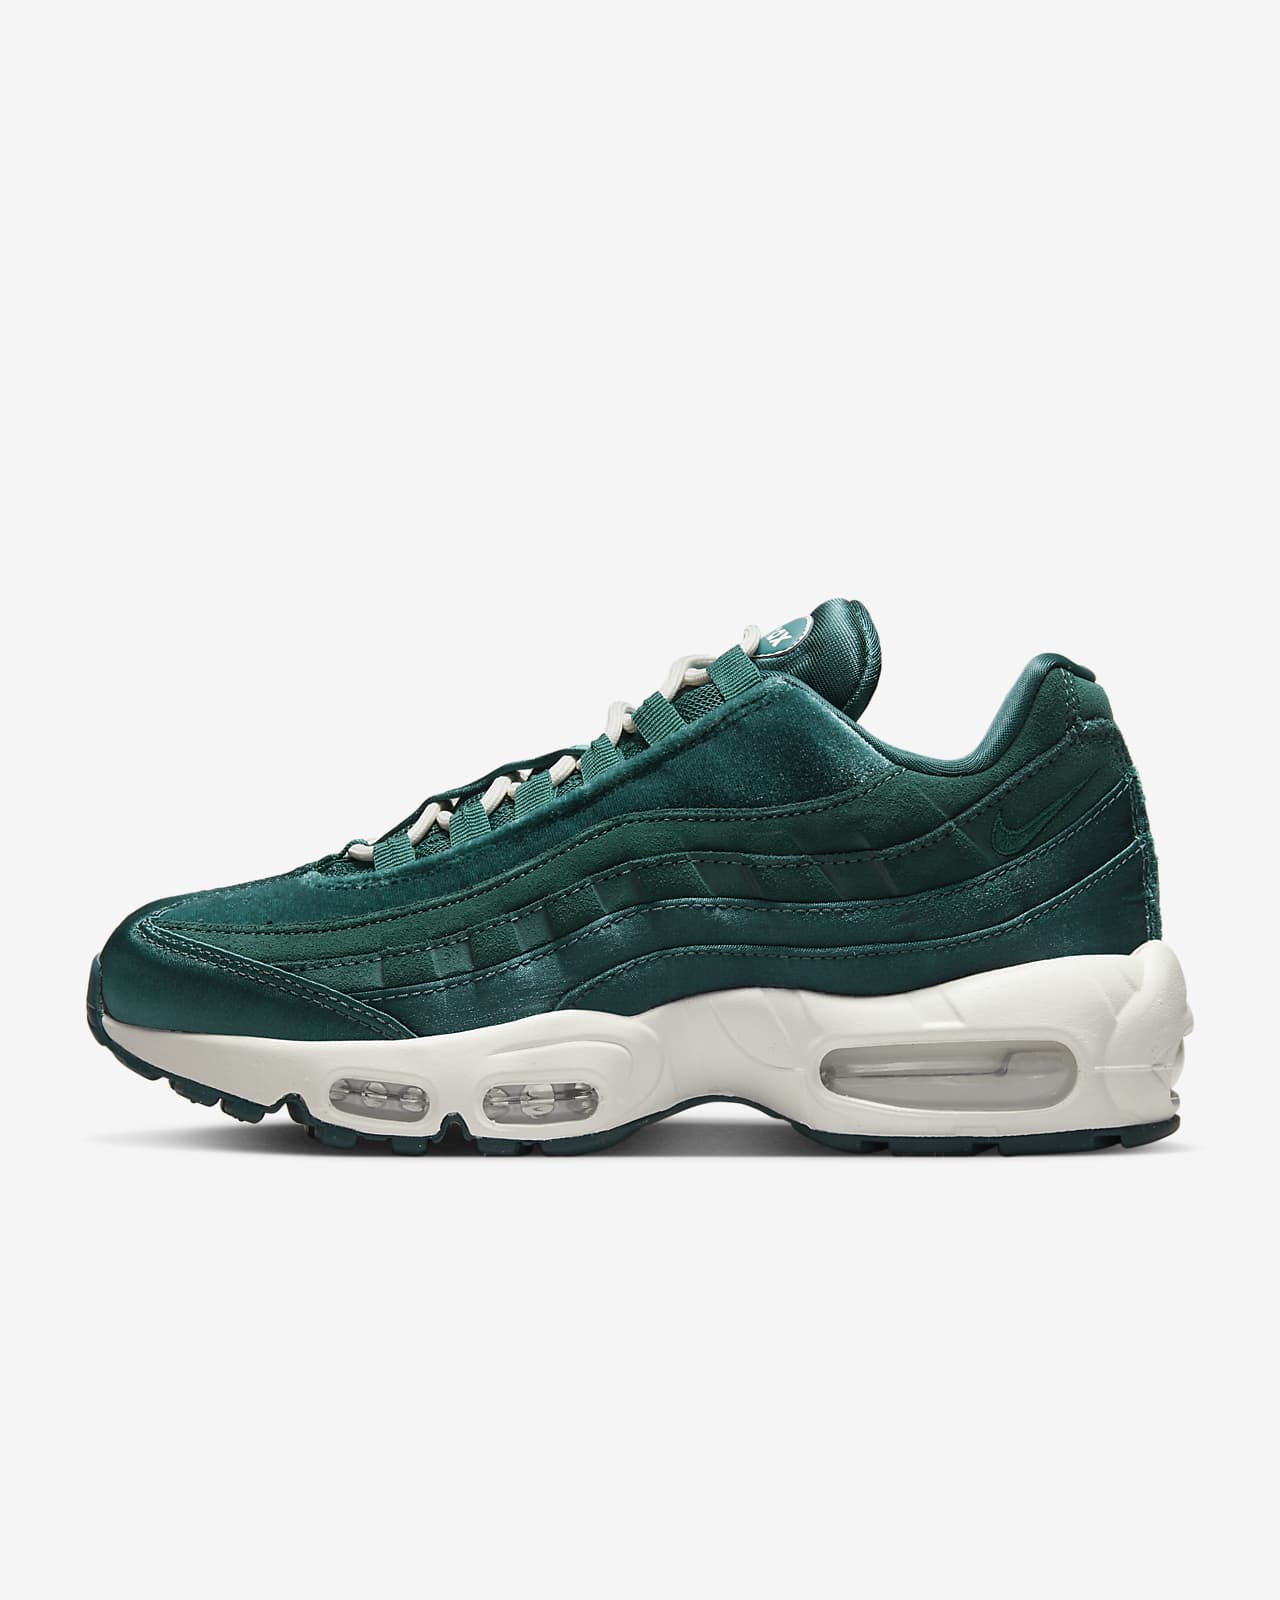 Victor Sage Get drunk Nike Air Max 95 Women's Shoes. Nike.com